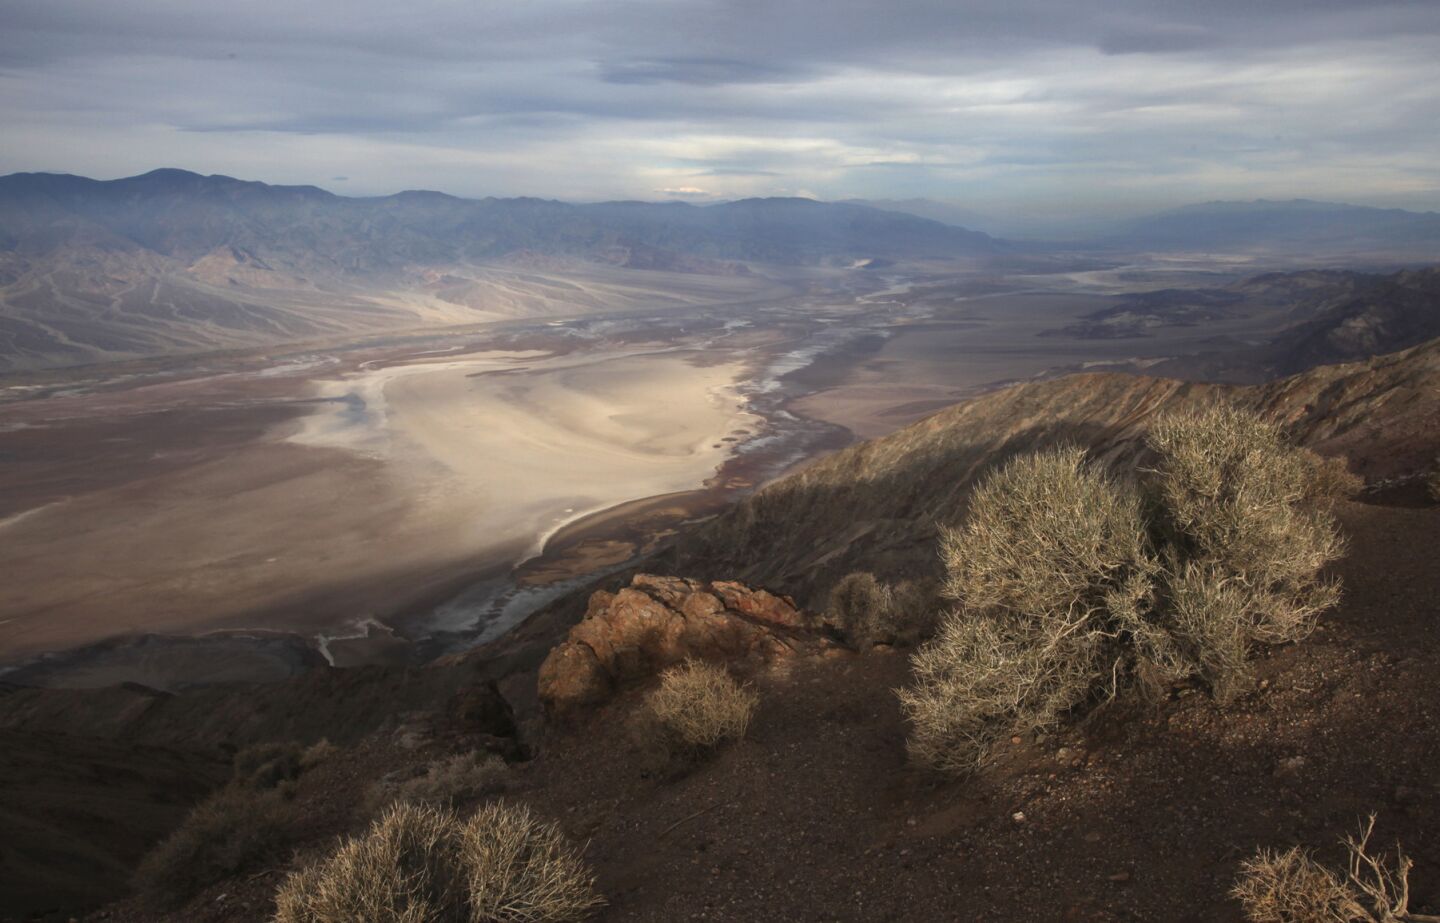 Dante's View offers a wide vista of Death Valley National Park with the Badwater Basin below, rimmed by the Panamint Mountain Range.